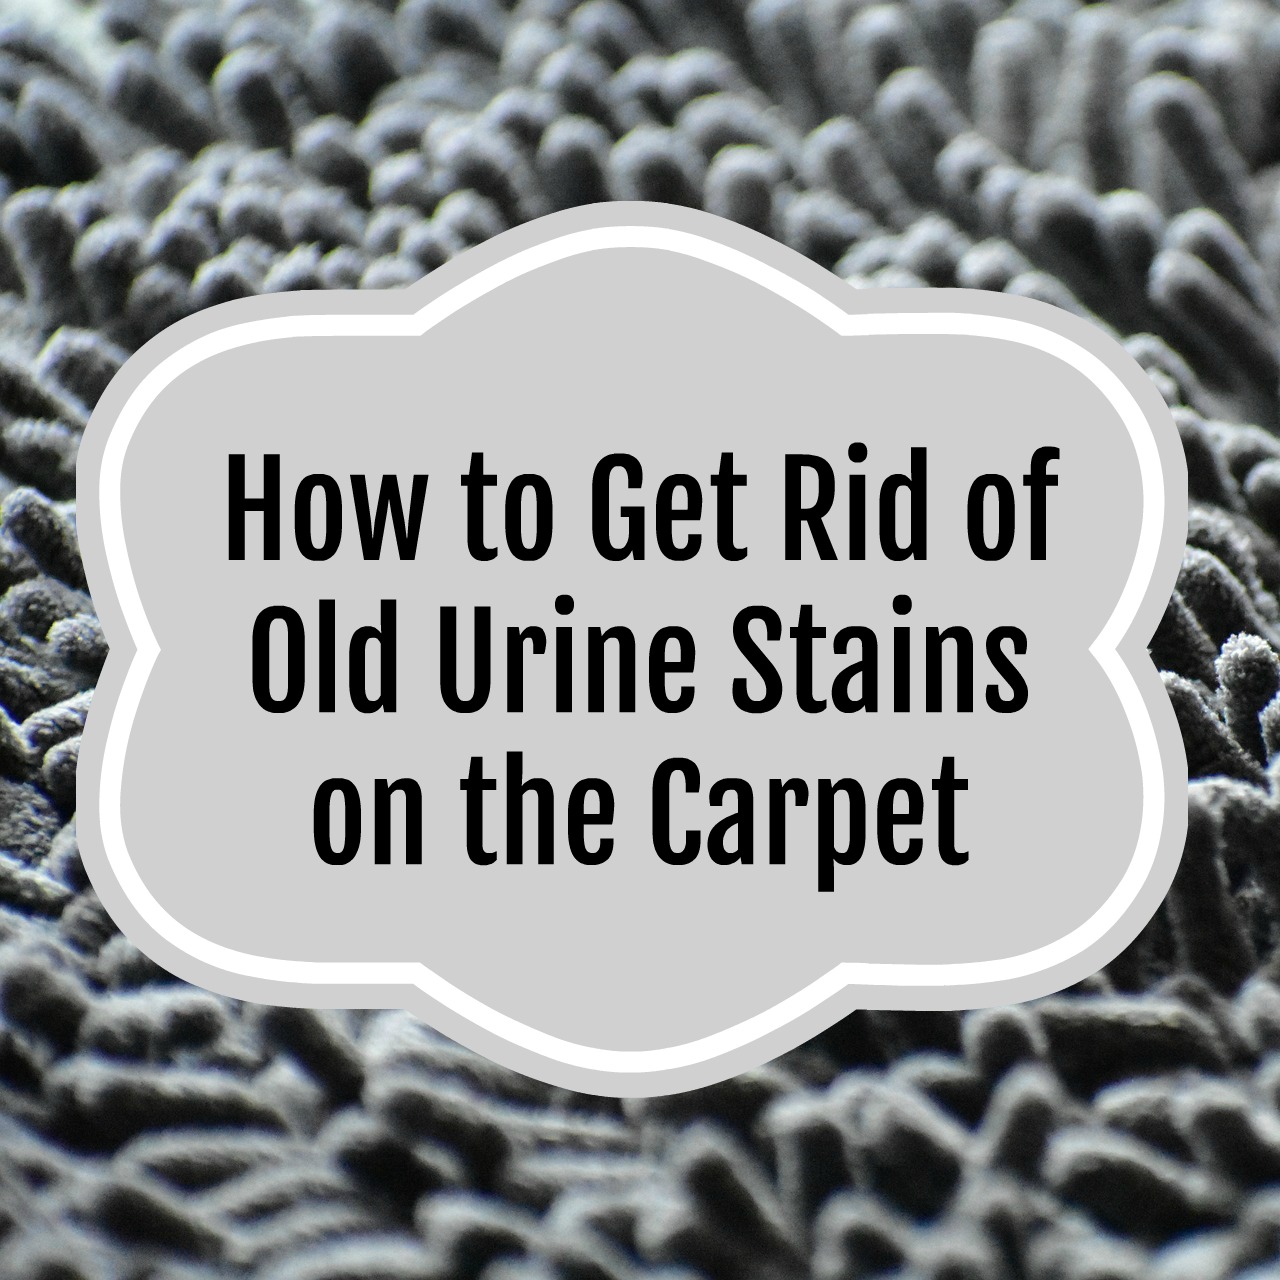 How to Get Rid of Old Urine Stains on the Carpet